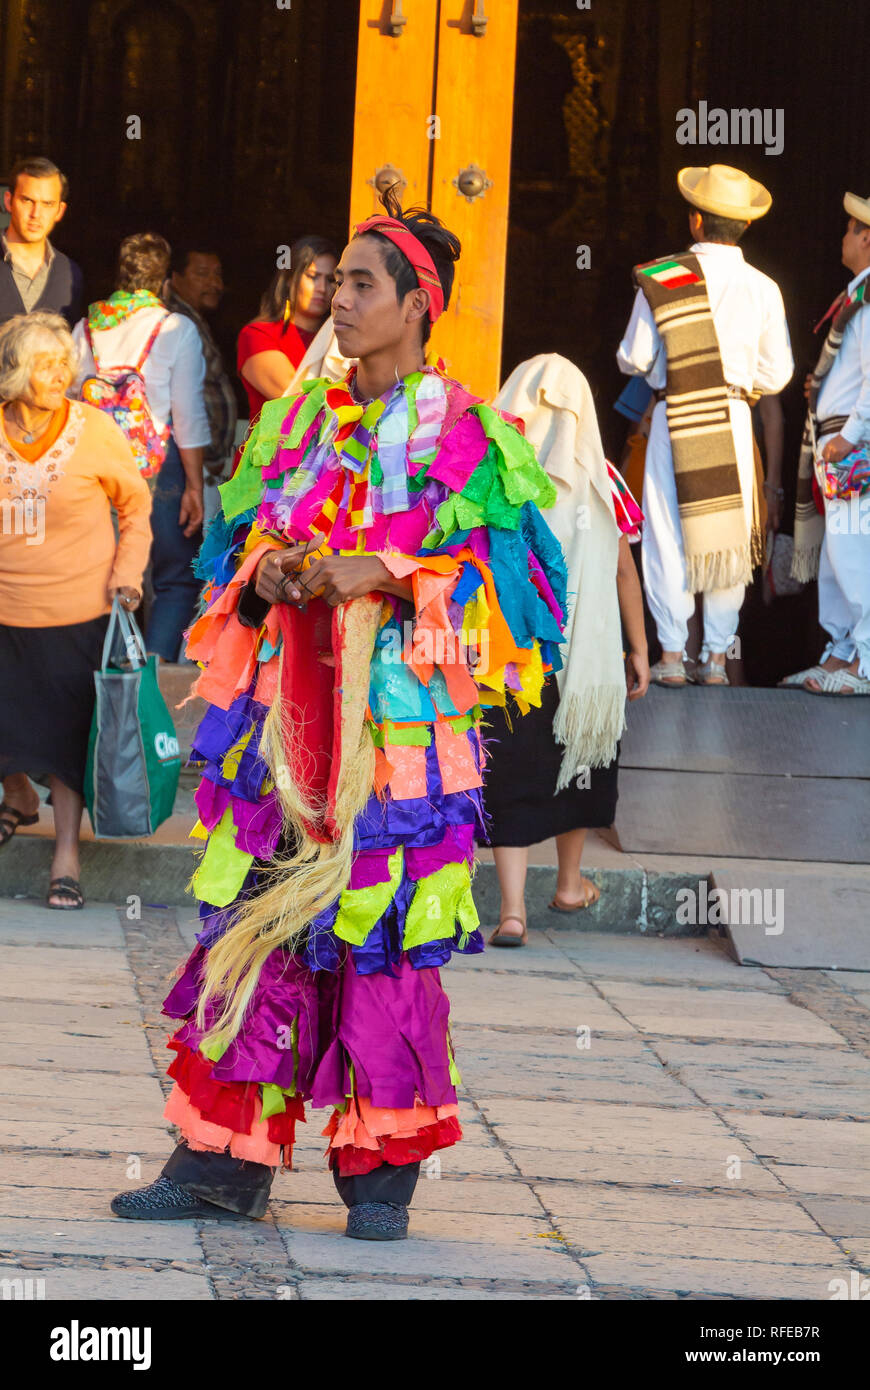 Local people in a traditional costume, oaxaca, mexico Stock Photo